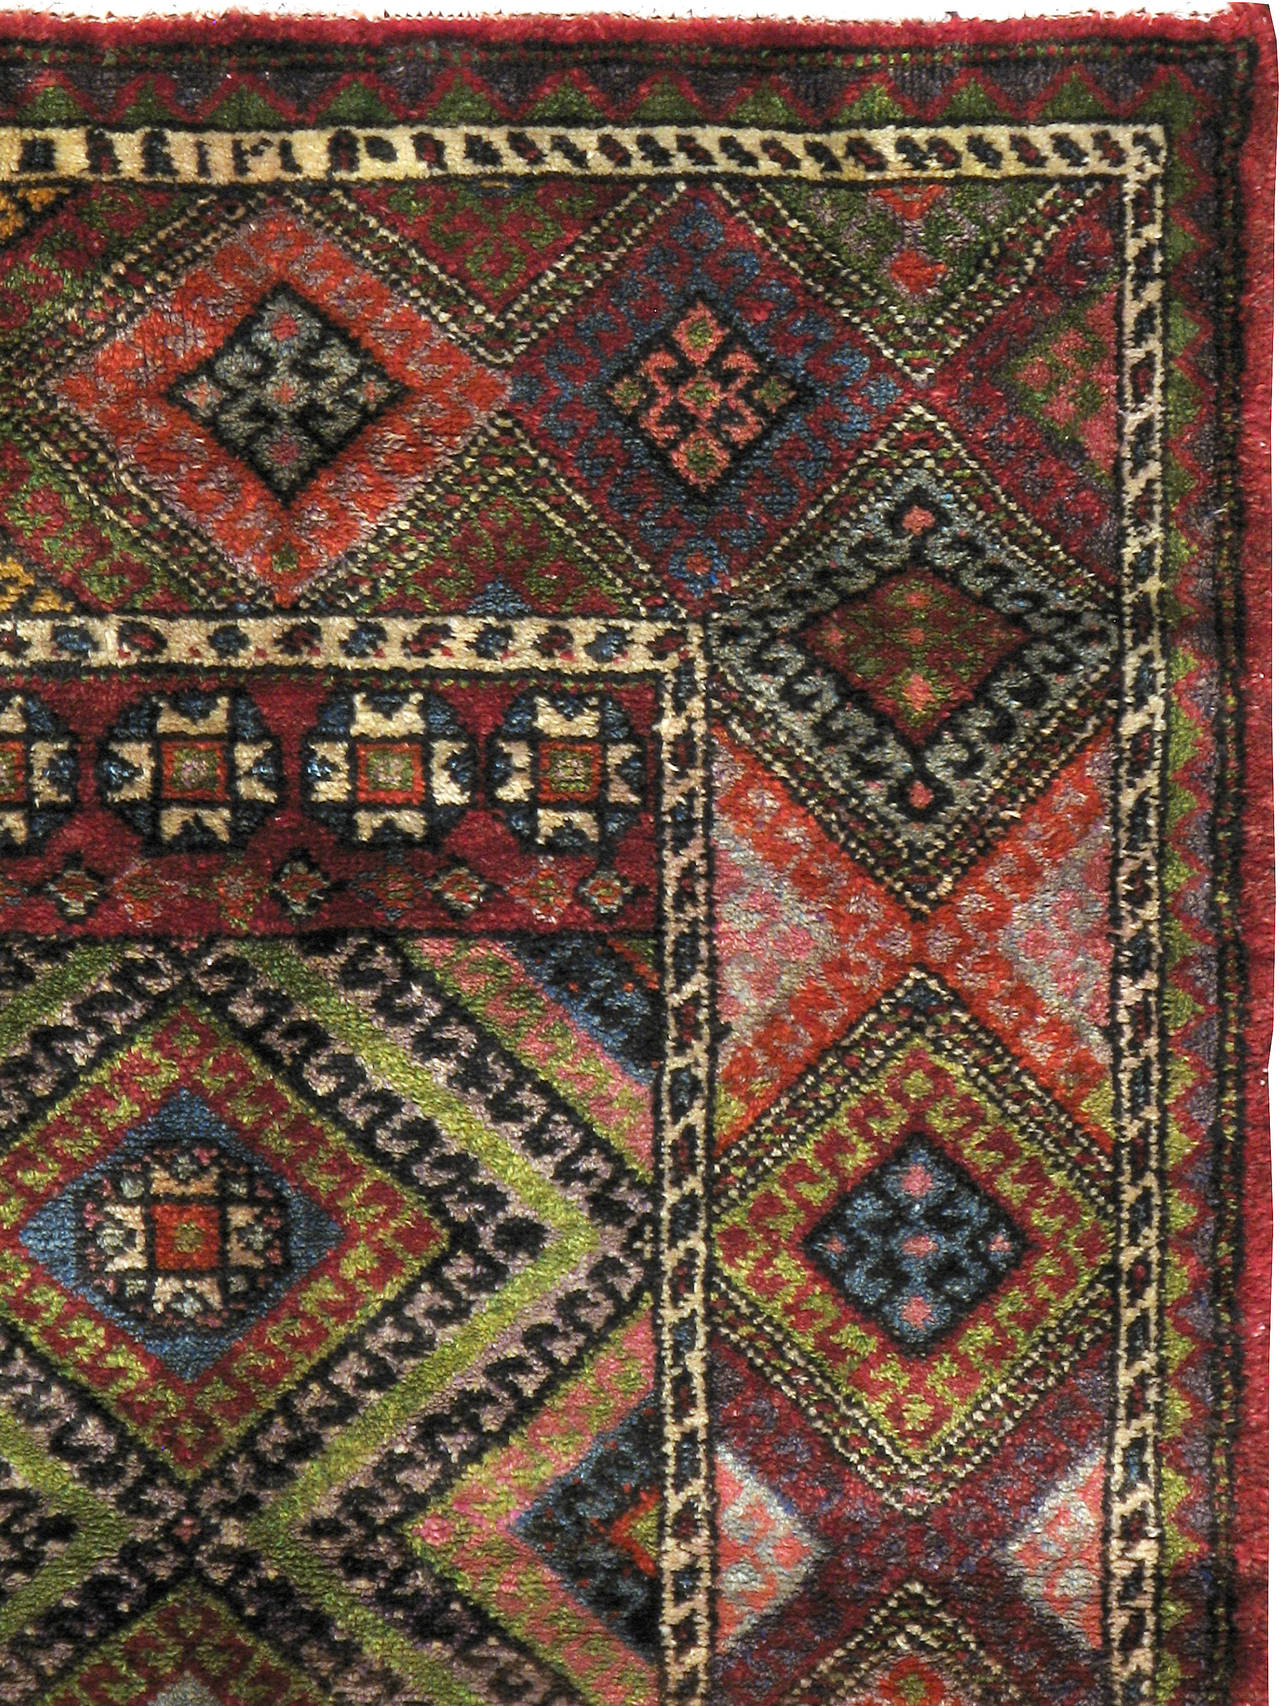 A Mid-Century vintage Anatolian carpet composed of geometric motifs in vibrant hues.